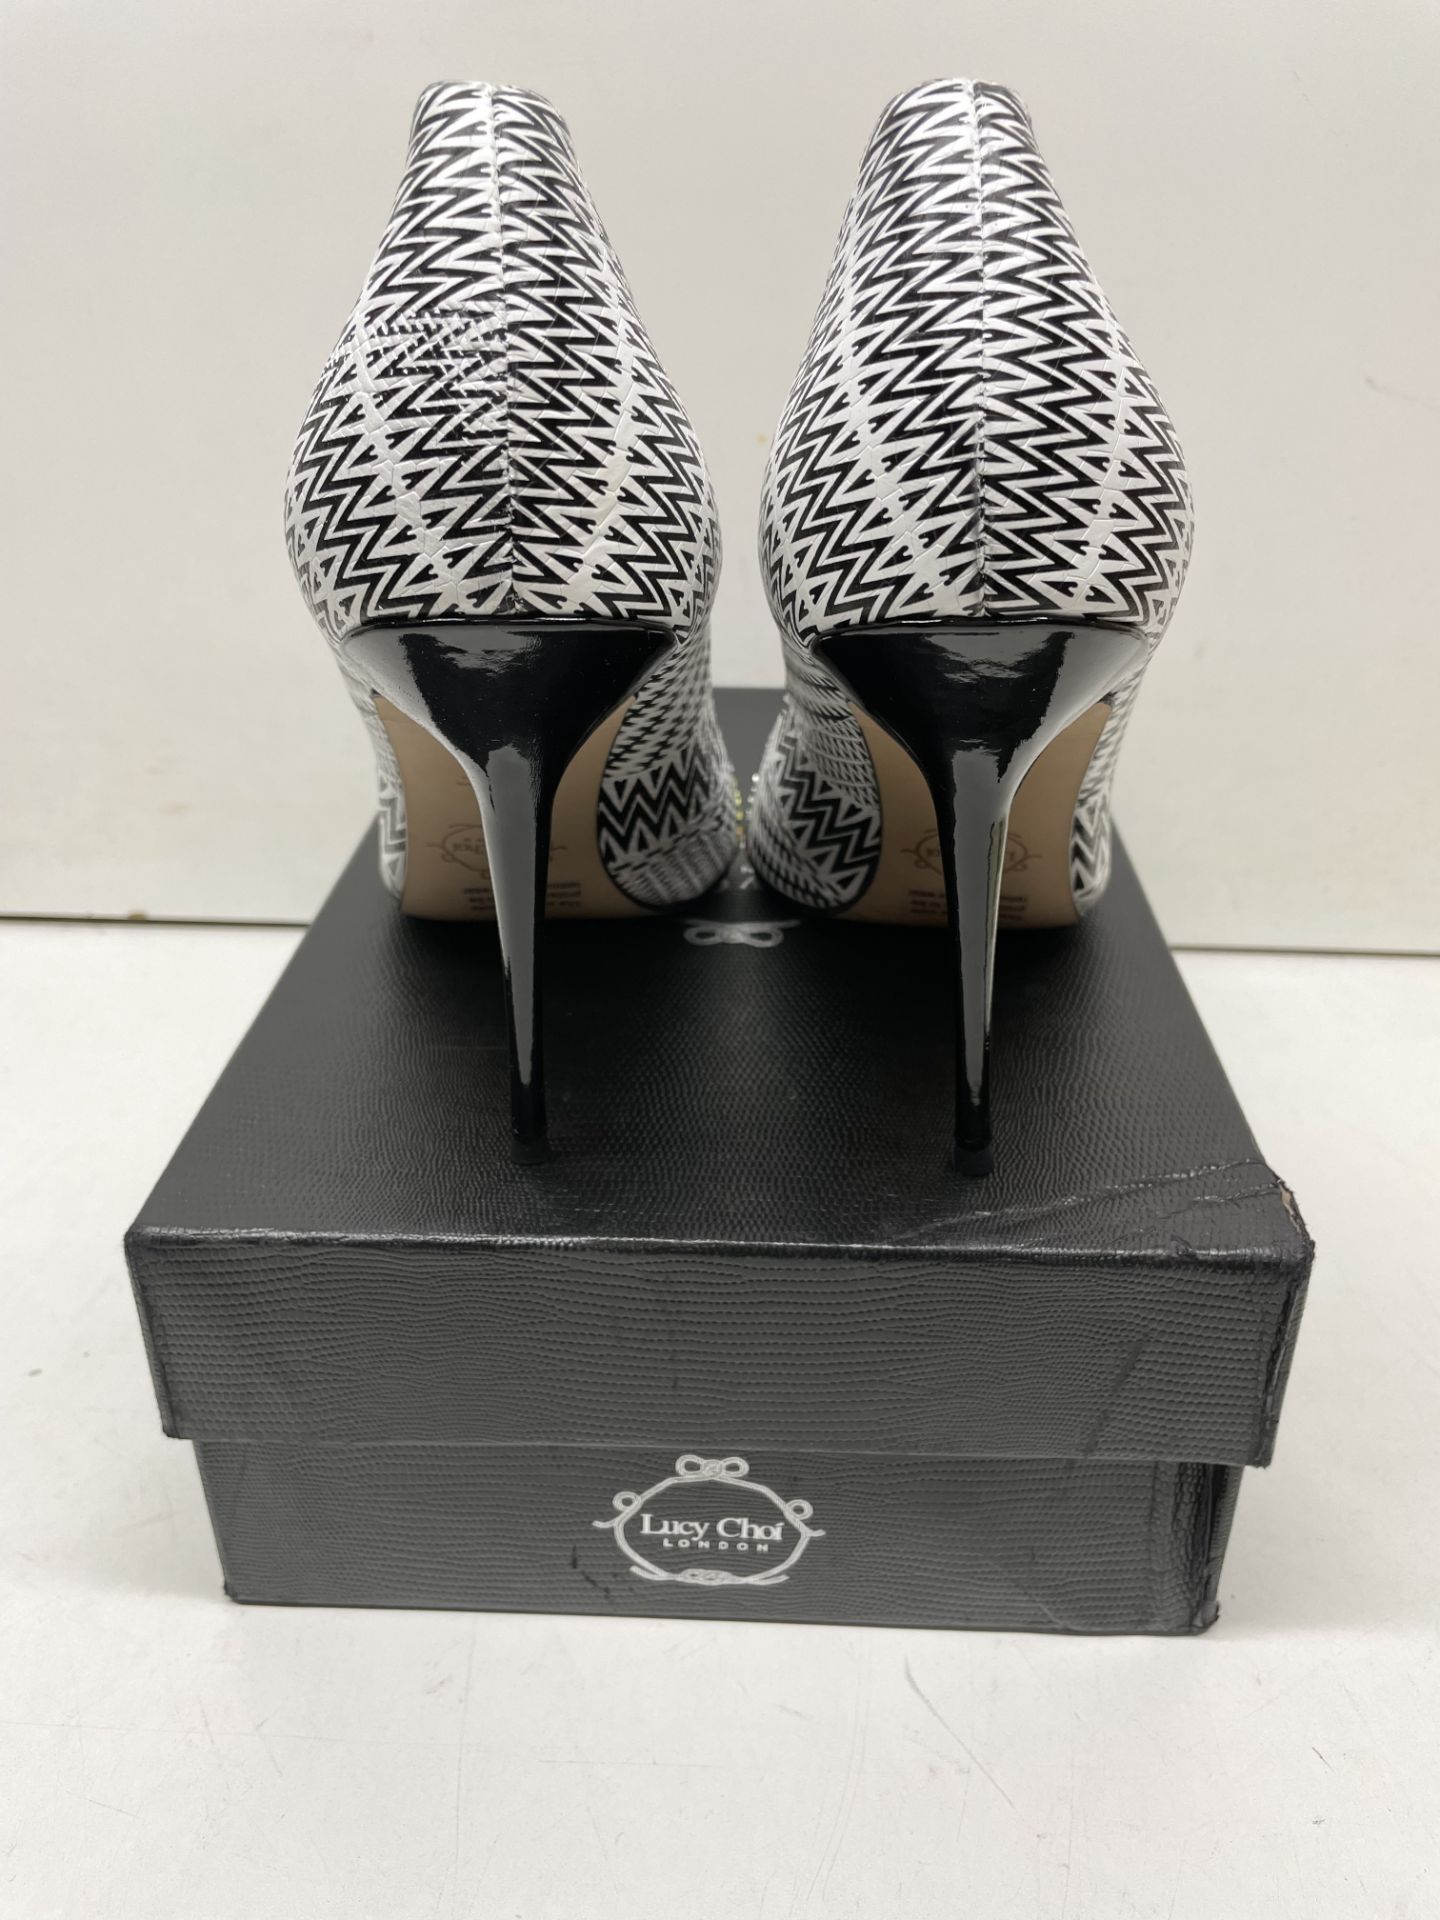 Ex-Display Lucy Choi Stiletto Heels | Eur 42 - Image 3 of 6